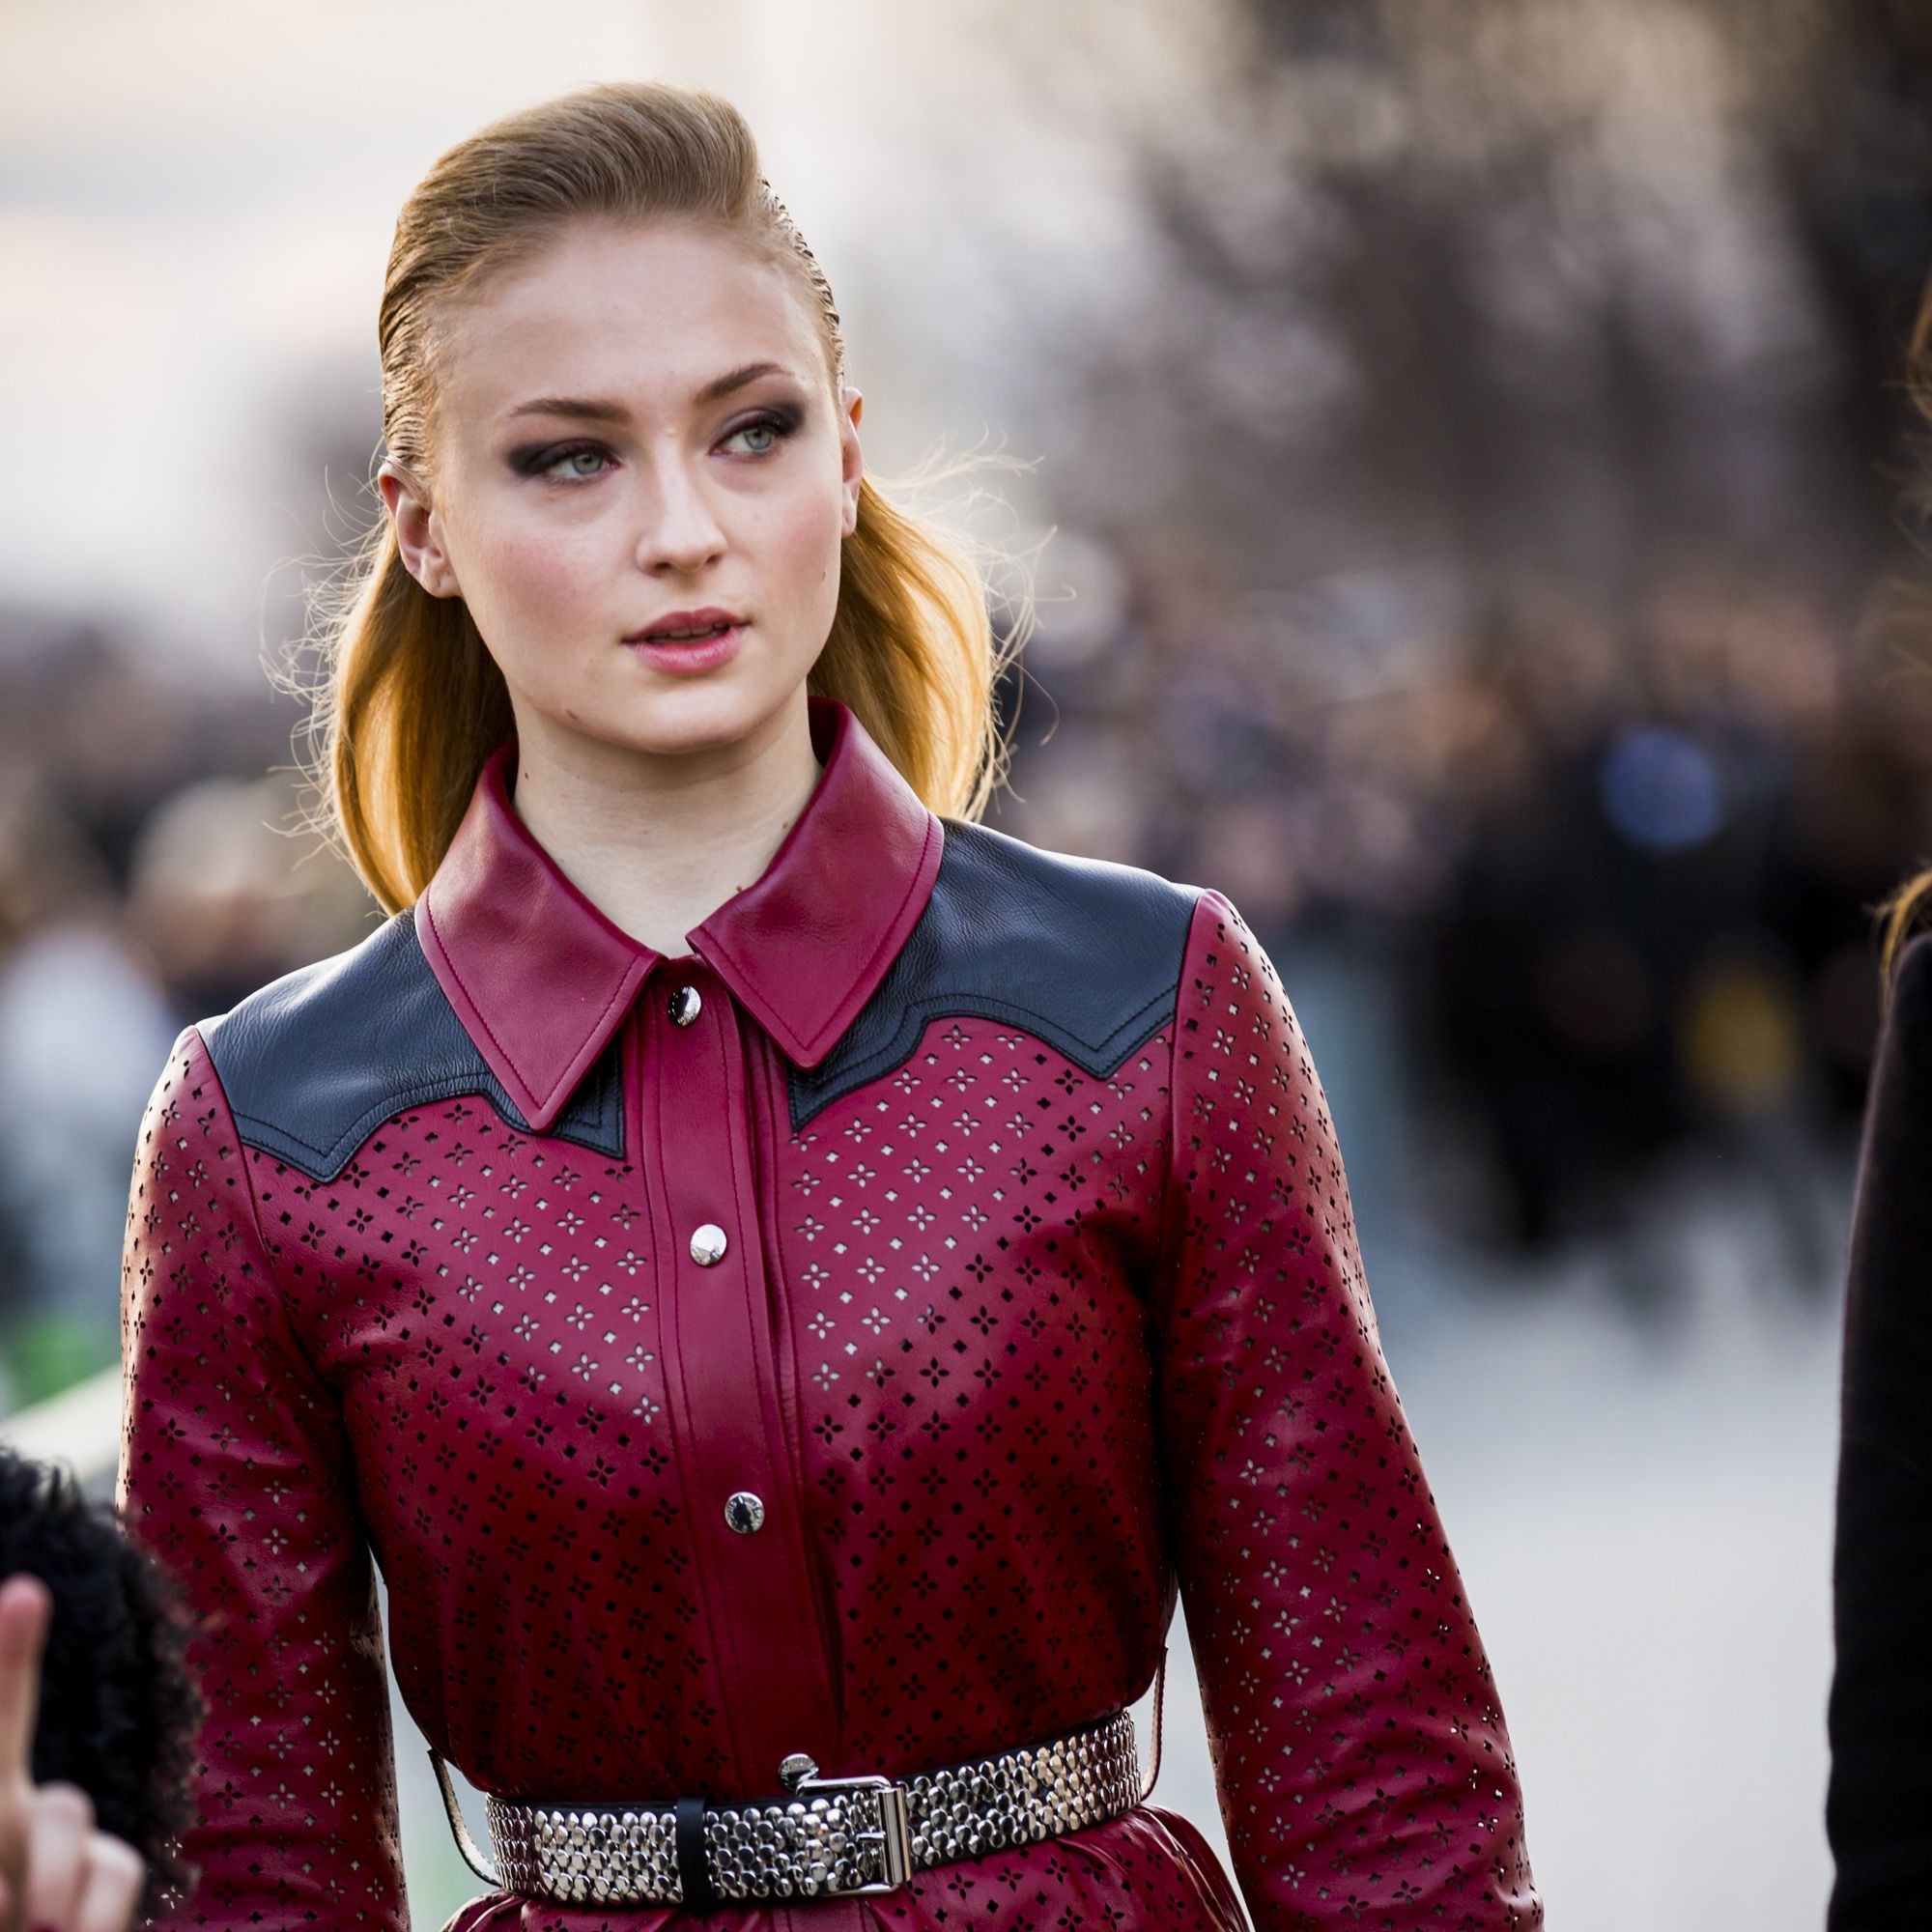 Sophie Turner Hasn't Watched 'Game of Thrones' in Years